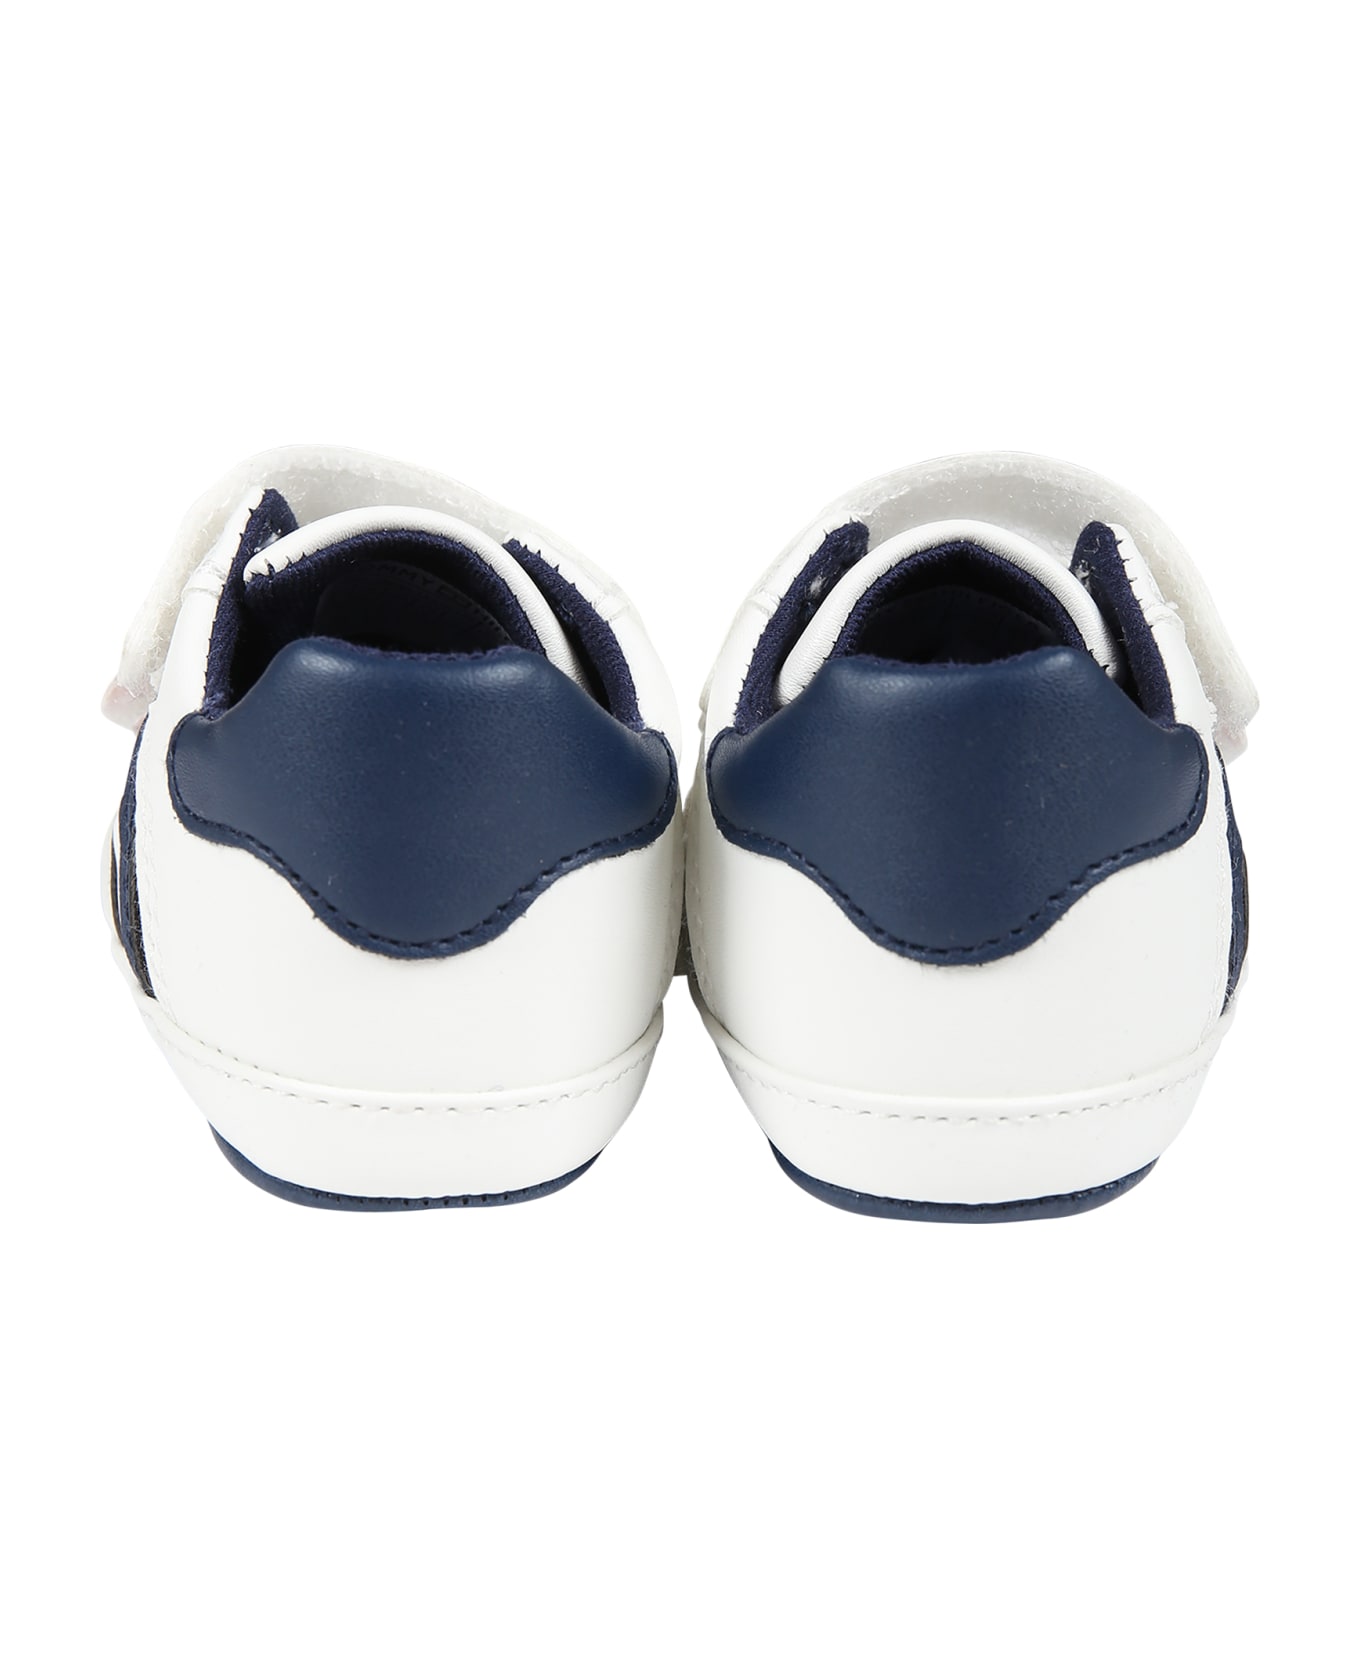 Tommy Hilfiger White Sneakers For Baby Boy With Logo - White